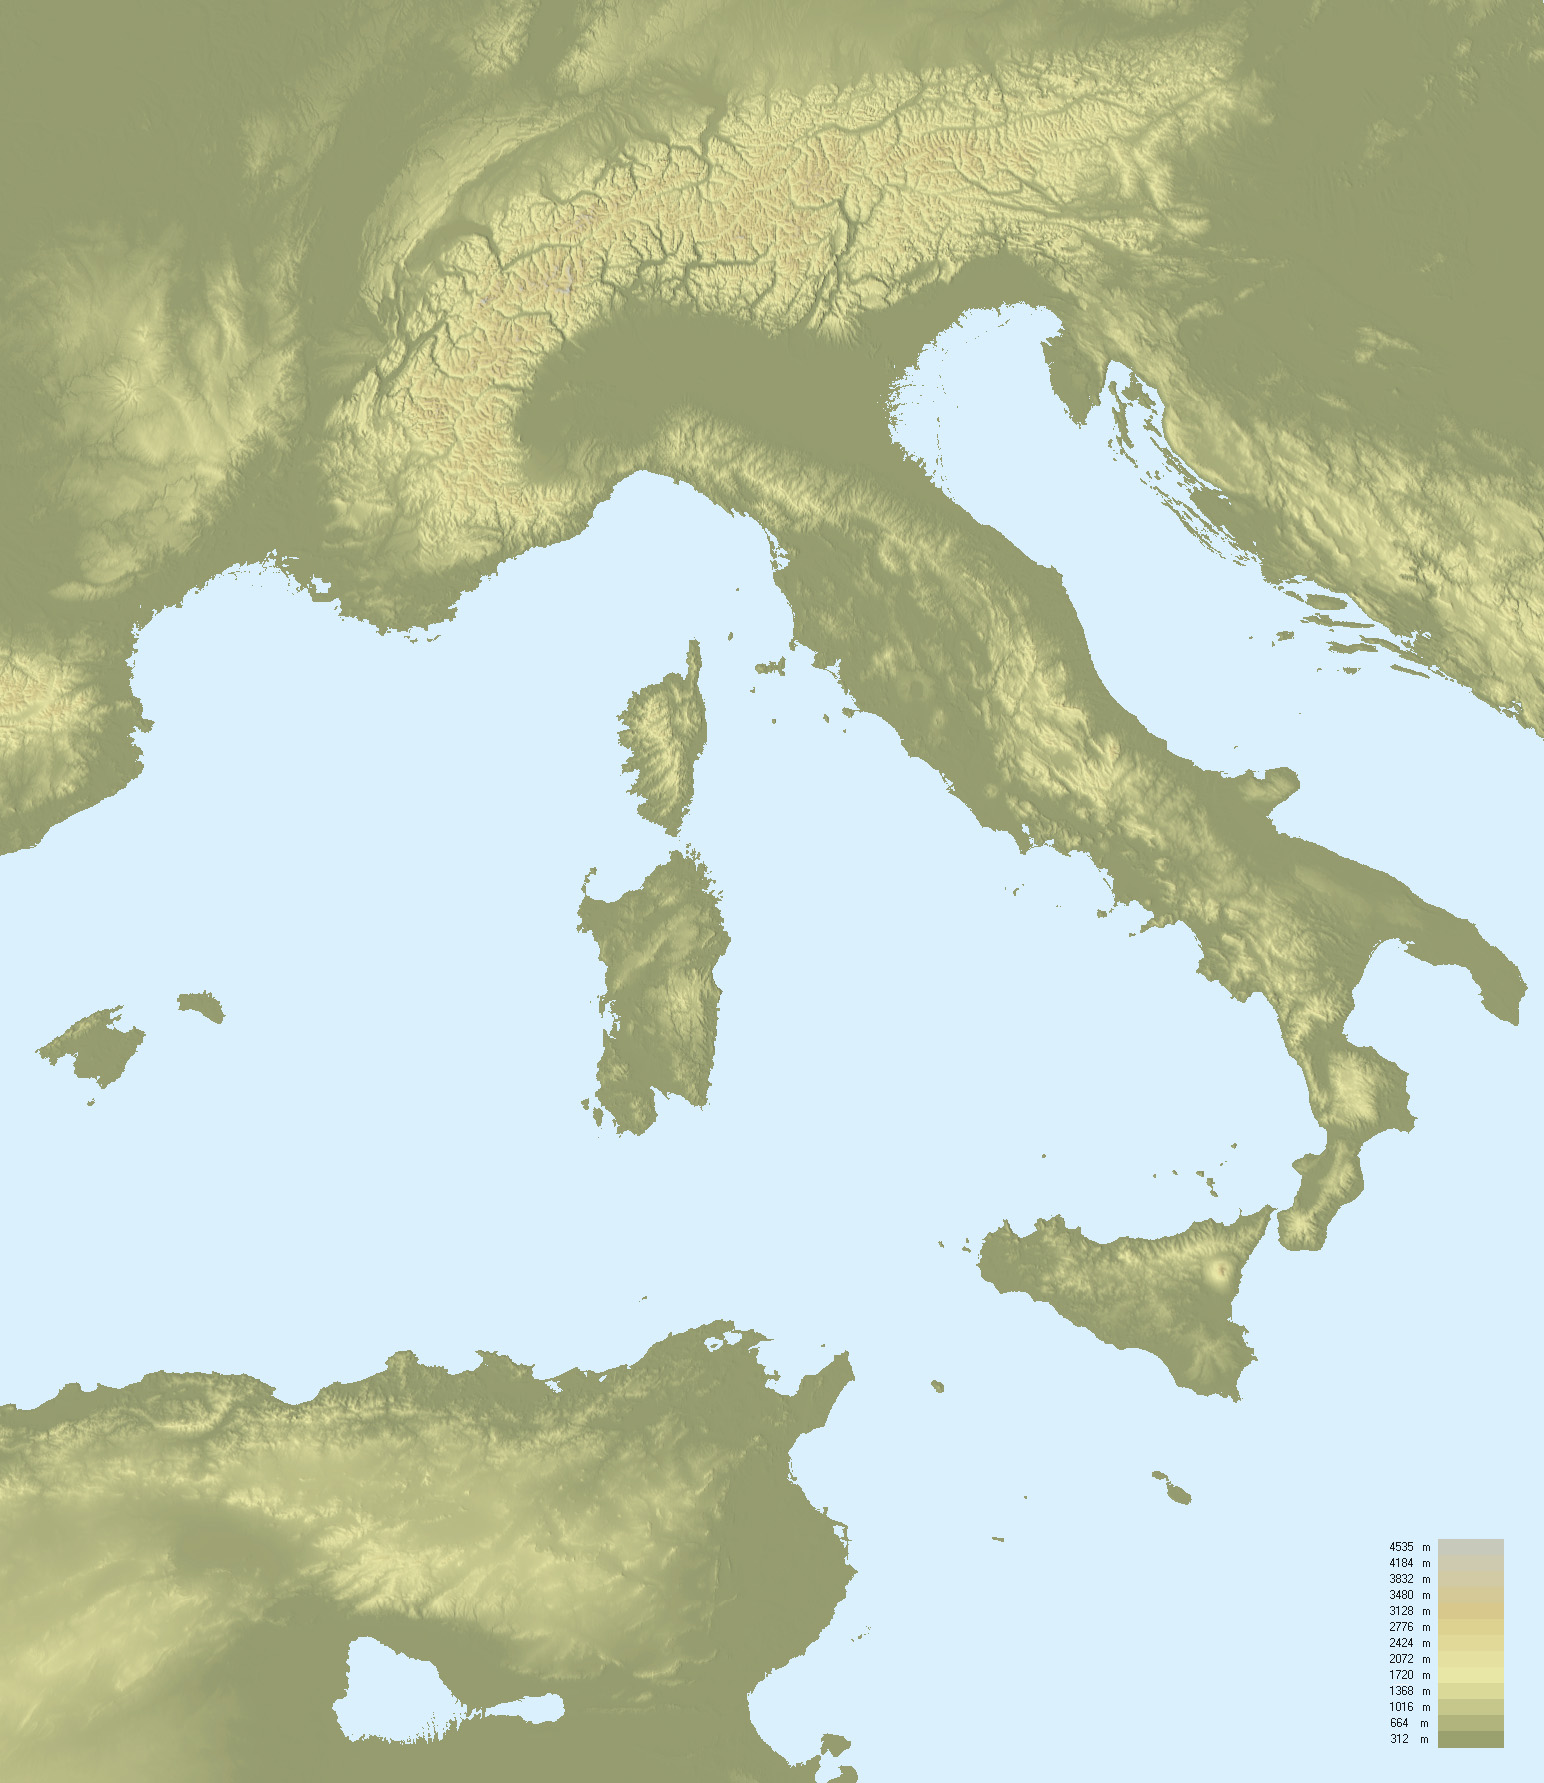 Topographic_map_of_Italy.jpg